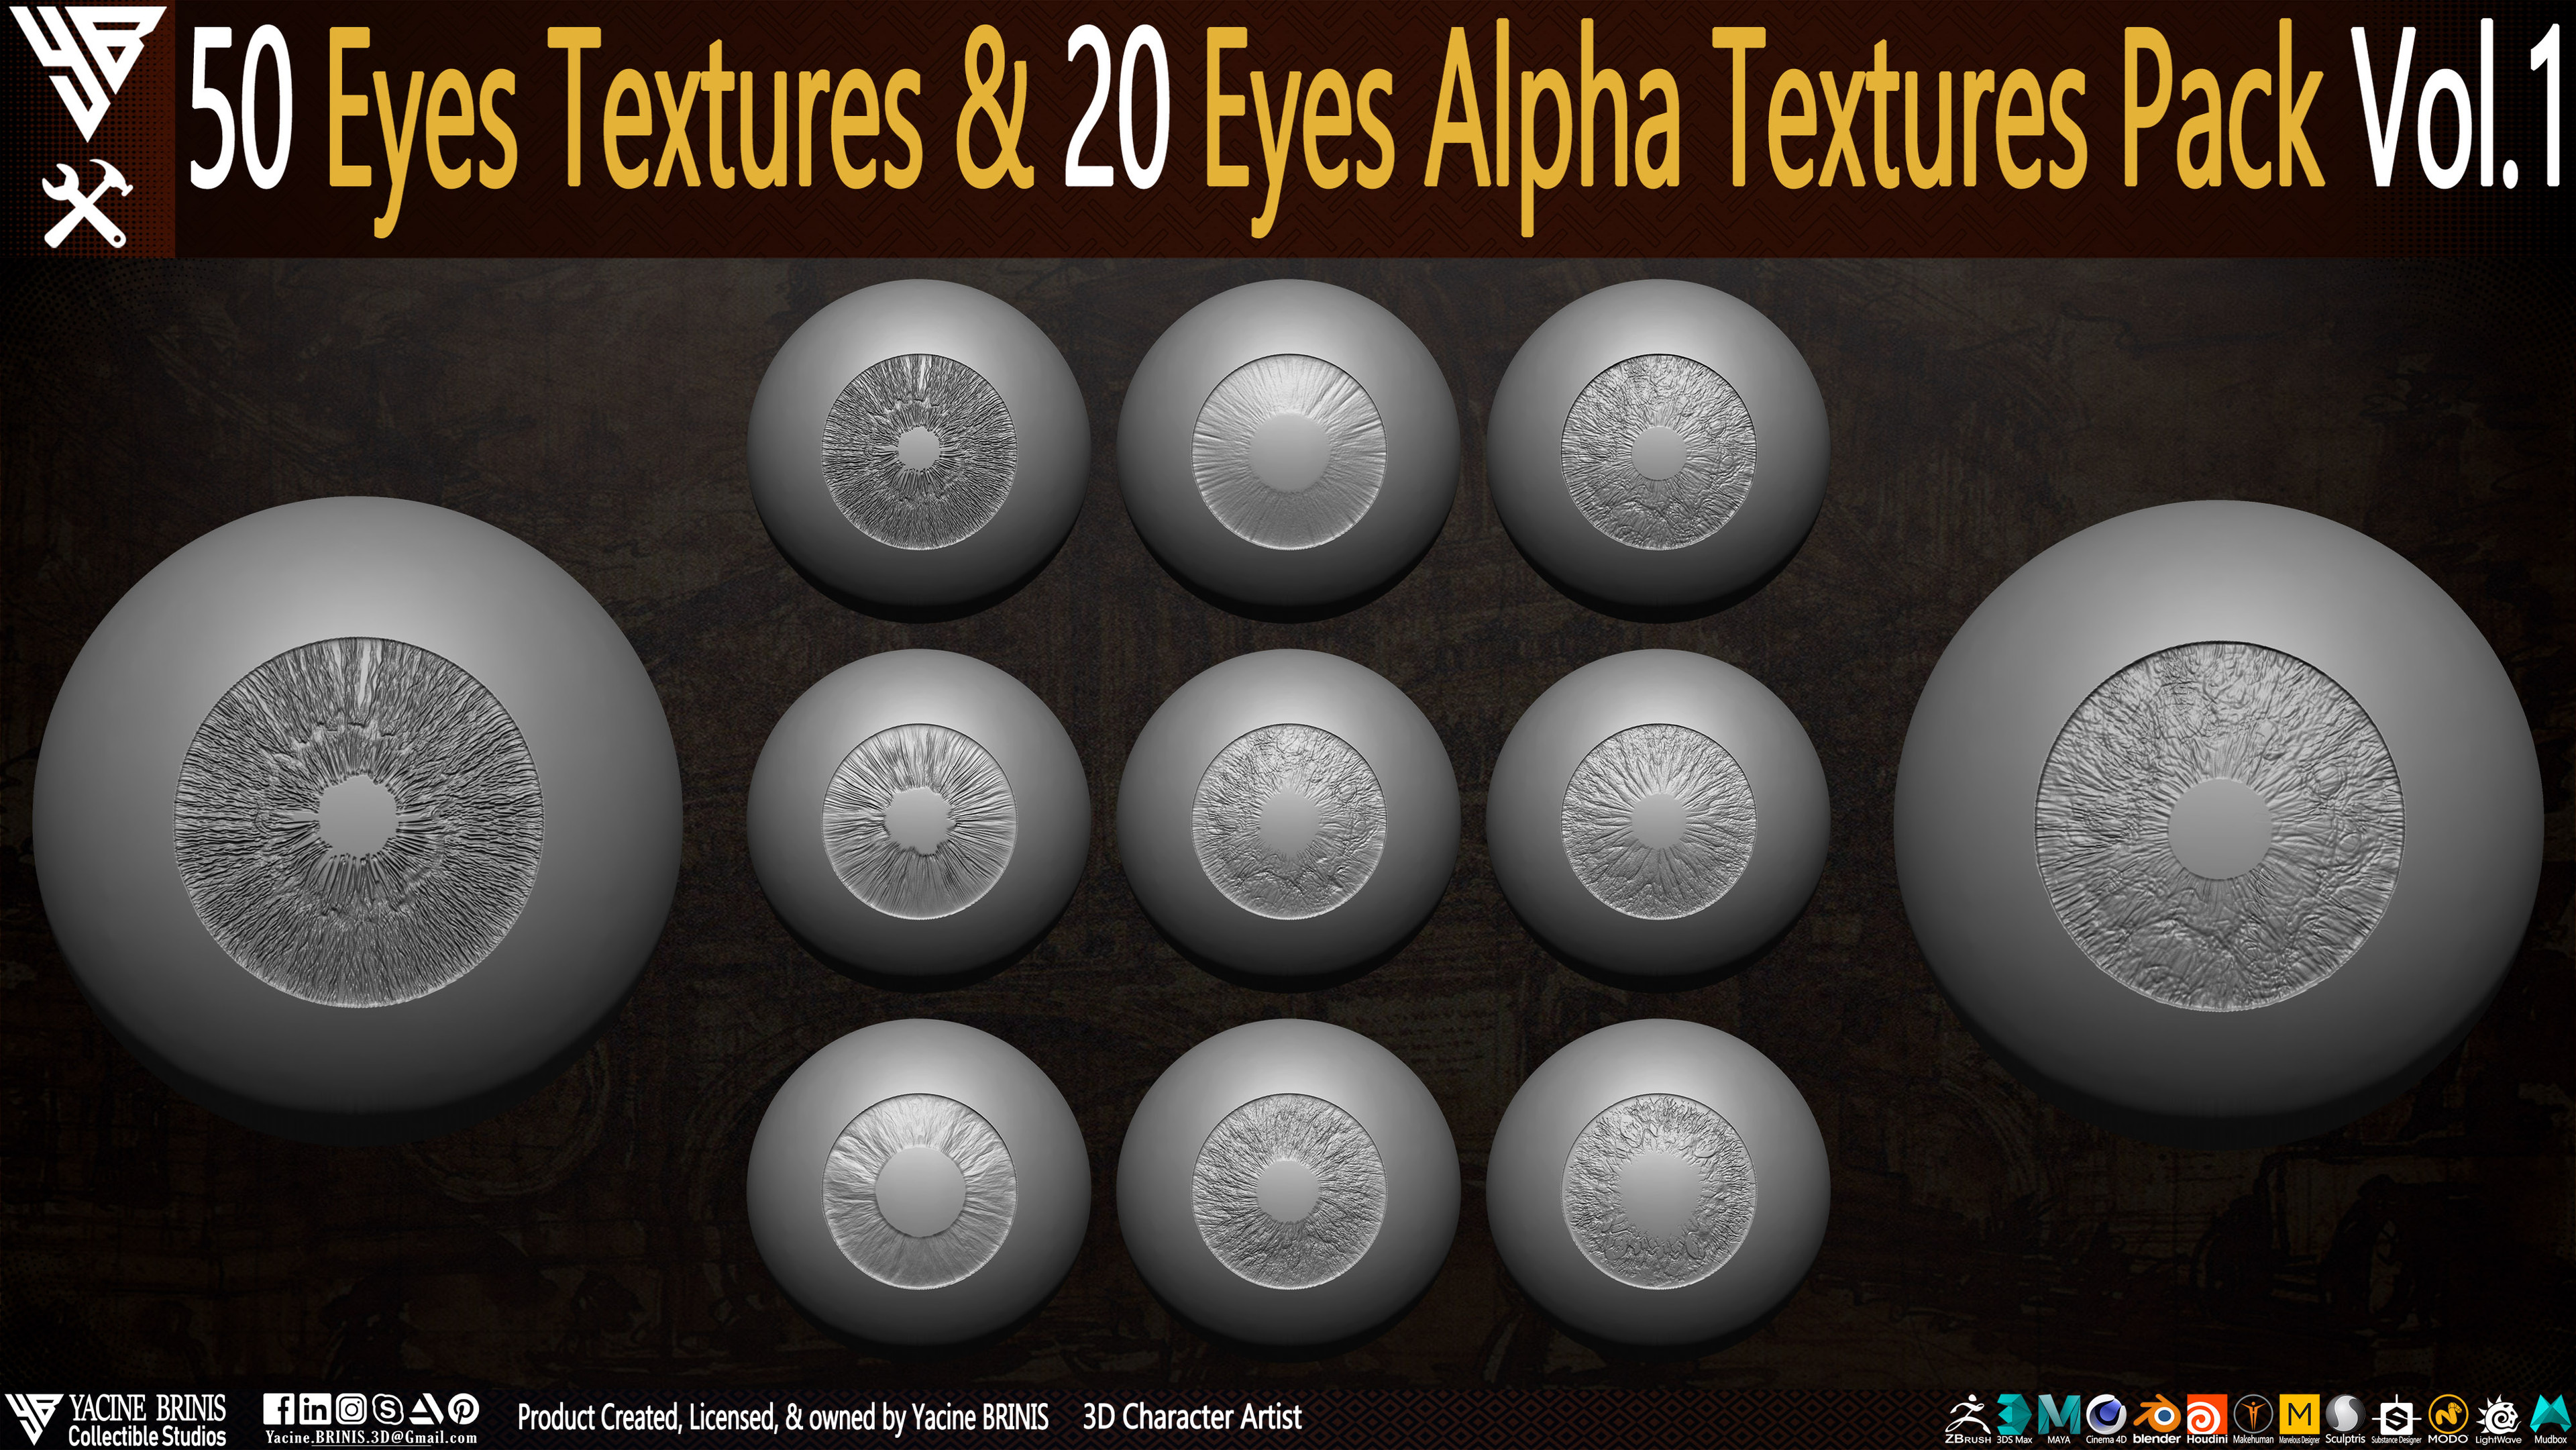 50 Eyes Textures and 20 Eyes Alpha Textures Pack Vol 01 sculpted by Yacine BRINIS Set 06